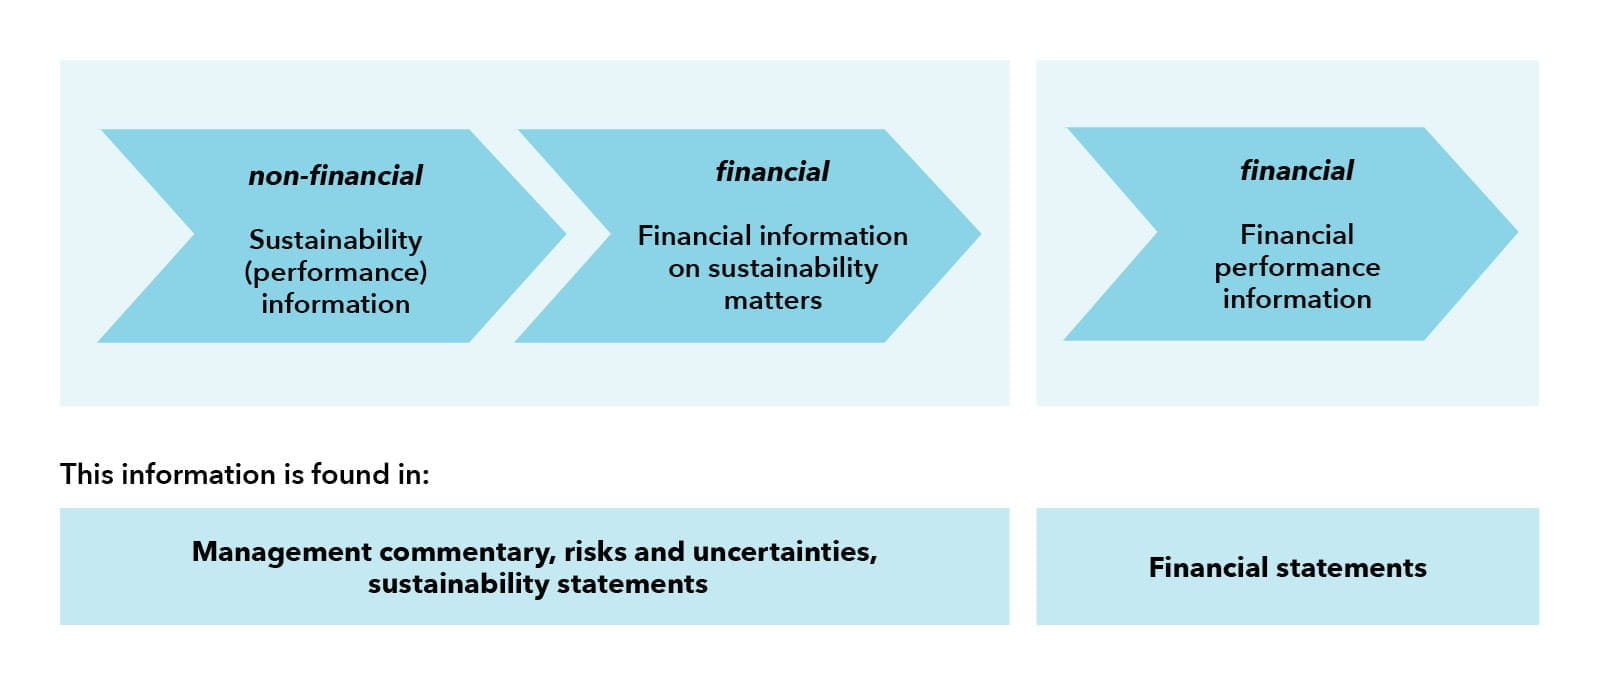 From sustainability performance to financial performance information